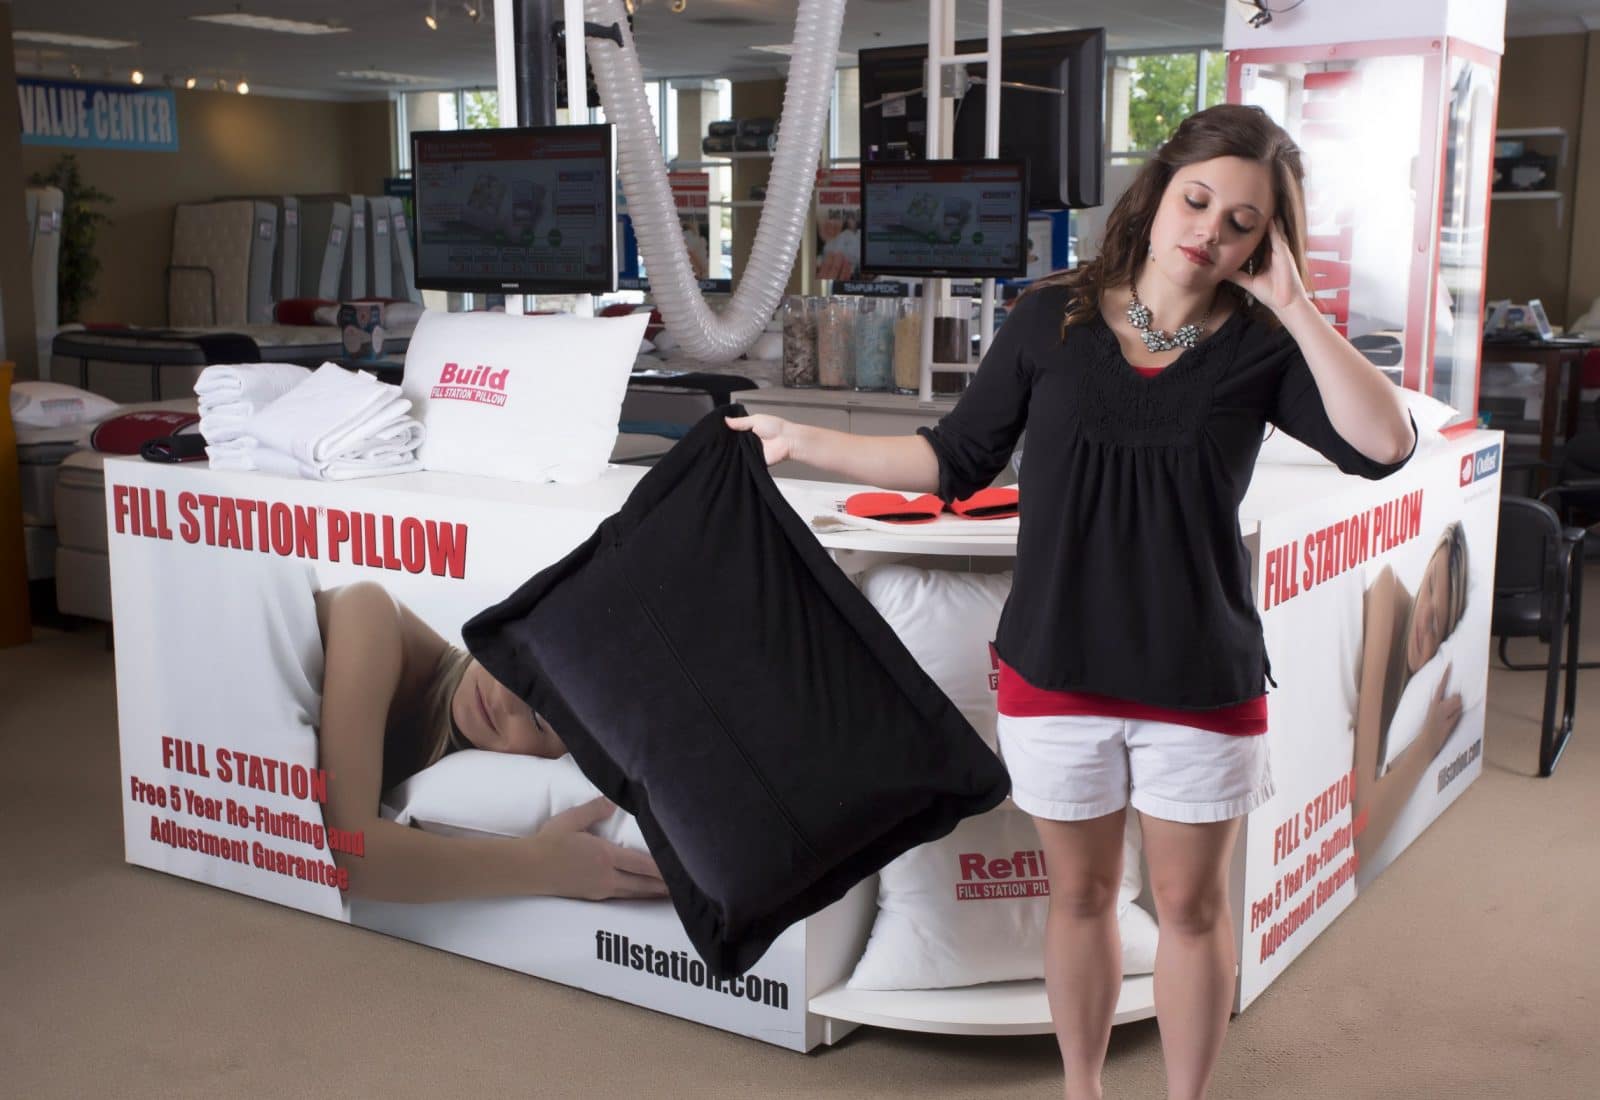 5 pillow infill materials you should try out